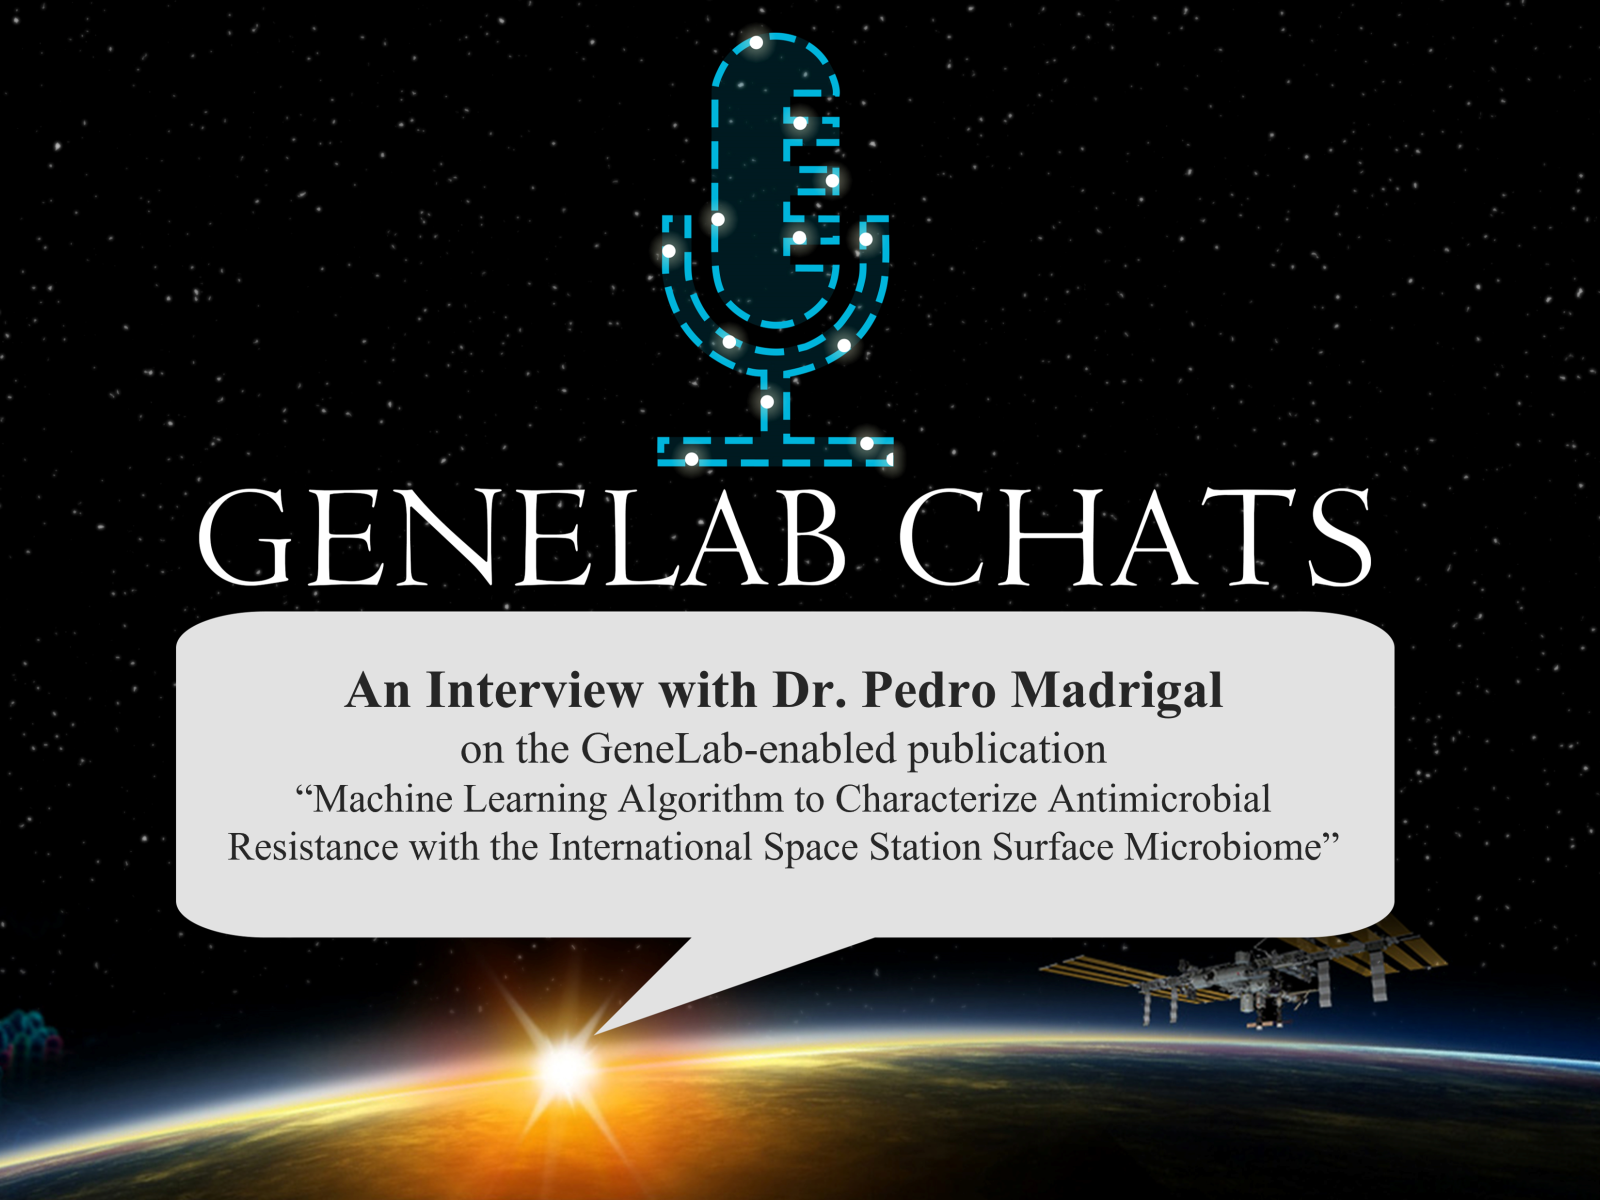 GeneLab Chats with Dr Pedro Madrigal